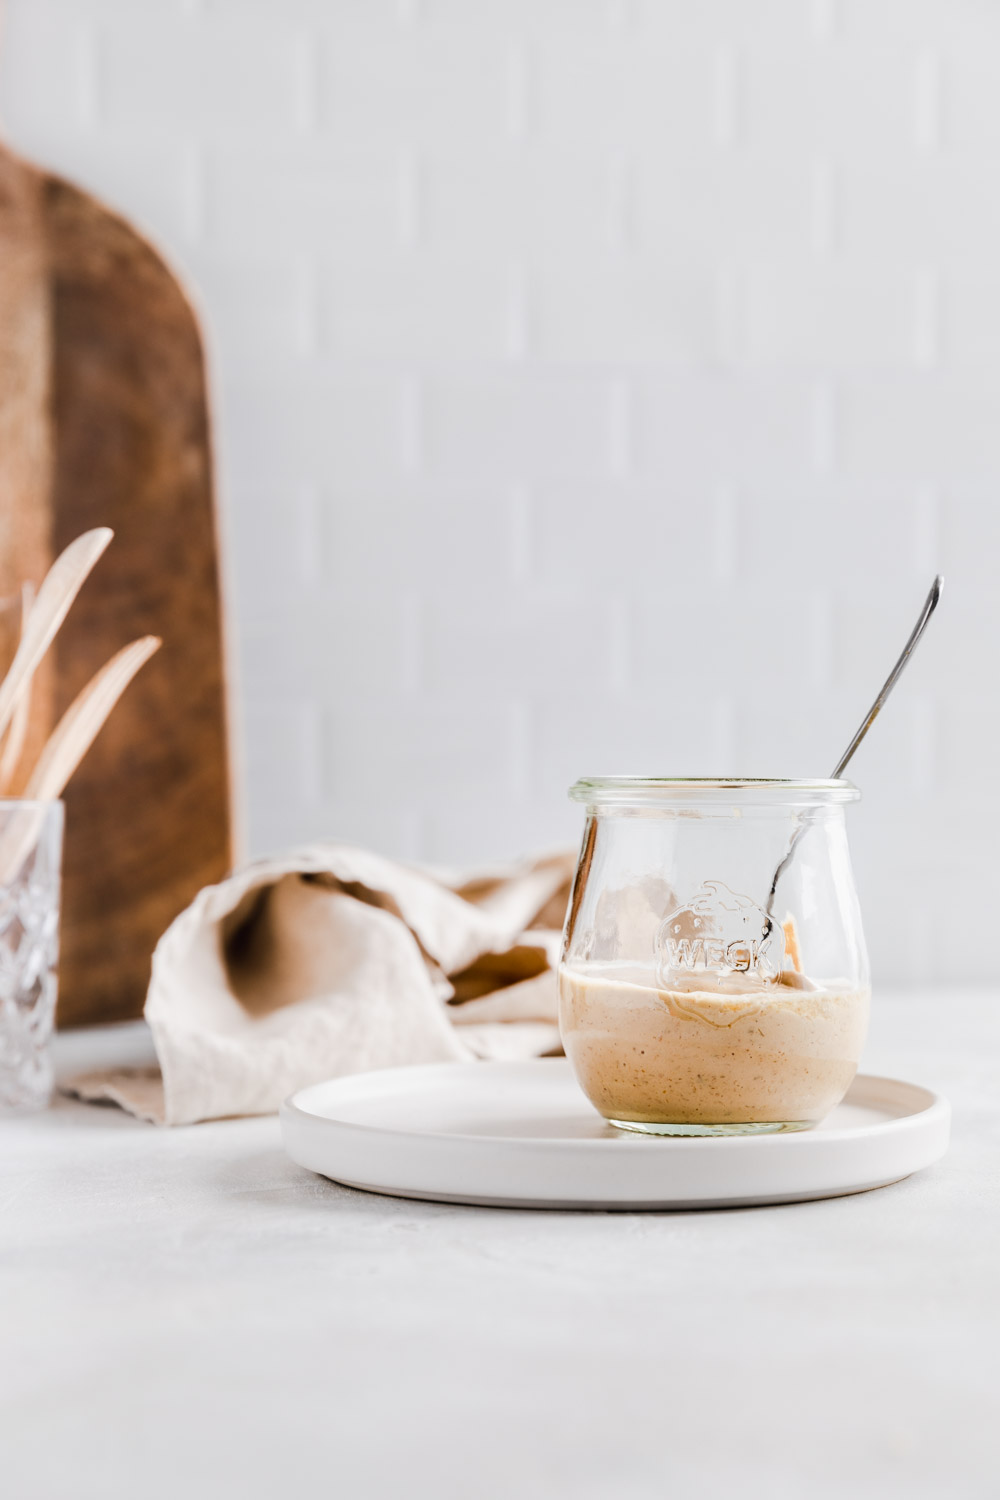 Spicy almond dressing in a small glass jar with a teaspoon on a light backdrop with a wooden cutting board, light brown napkin and wooden utensils in the background.